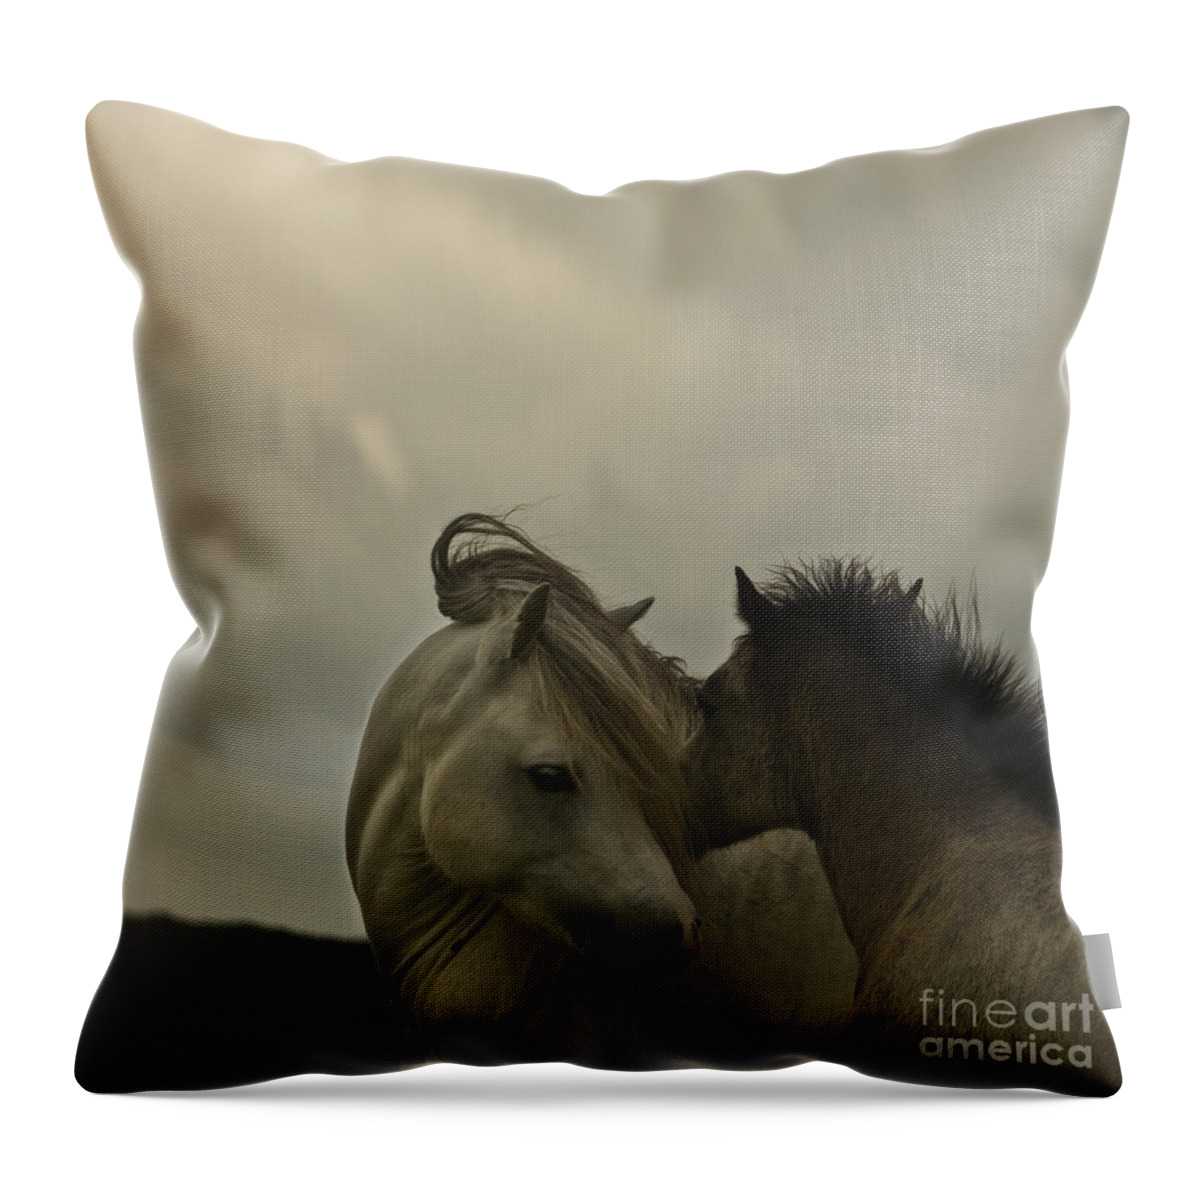 Horses Throw Pillow featuring the photograph Cuddle Me by Ang El